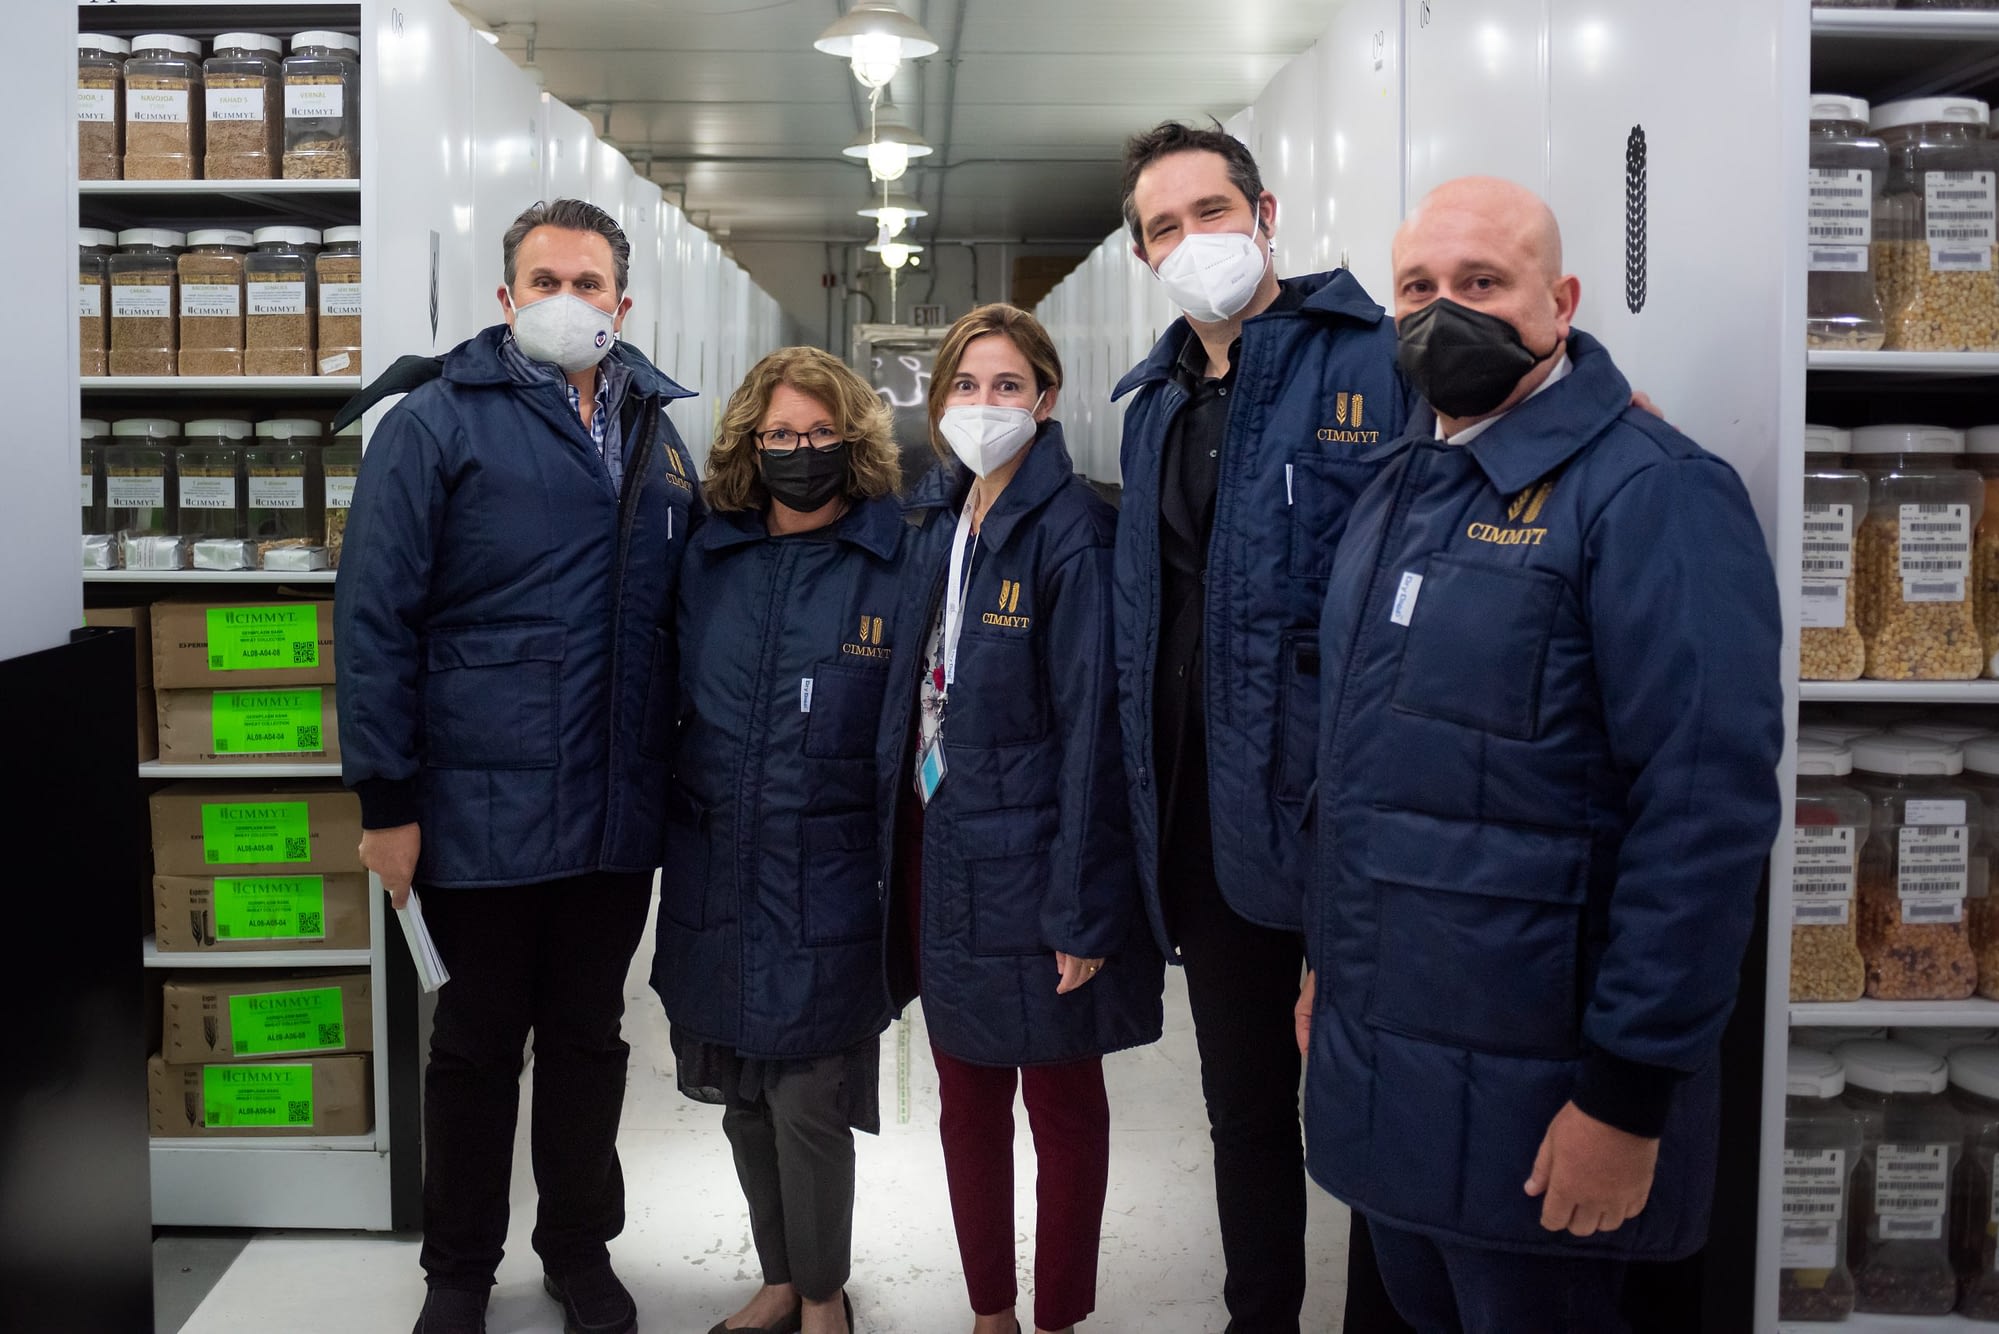 (Left to right) Joaquín Lozano, Claudia Sadoff, Carolina Sansaloni, Bram Govaerts and Alberto Chassaigne stand for a group photo inside the germplasm bank at CIMMYT’s global headquarters in Texcoco, Mexico. (Photo: Alfonso Cortés/CIMMYT)